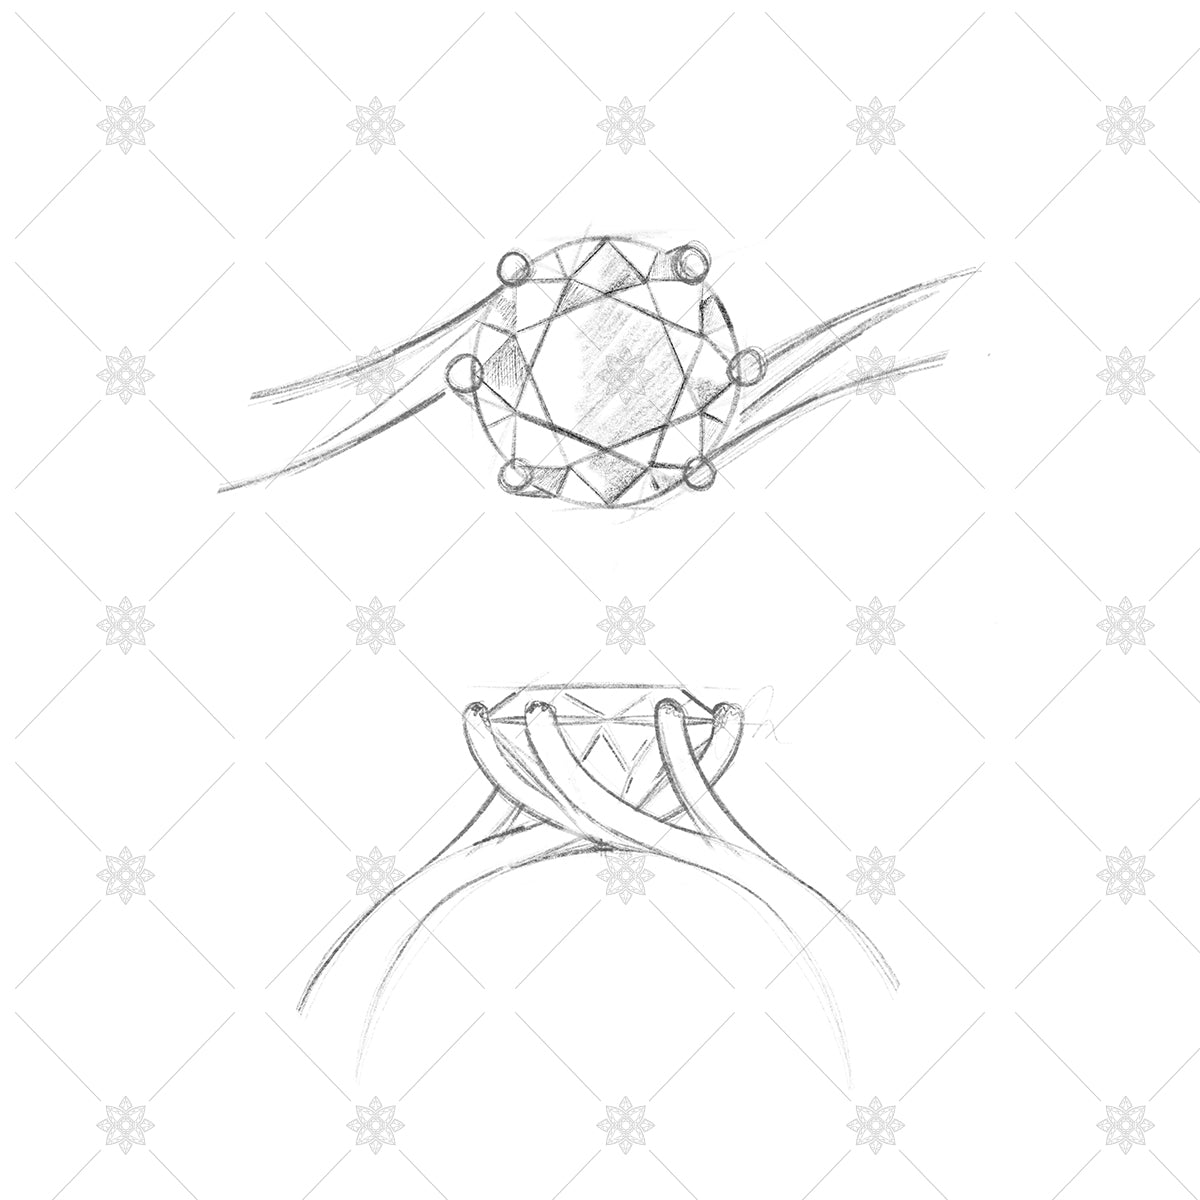 Solitaire Twist Ring pencil sketches - SK1022